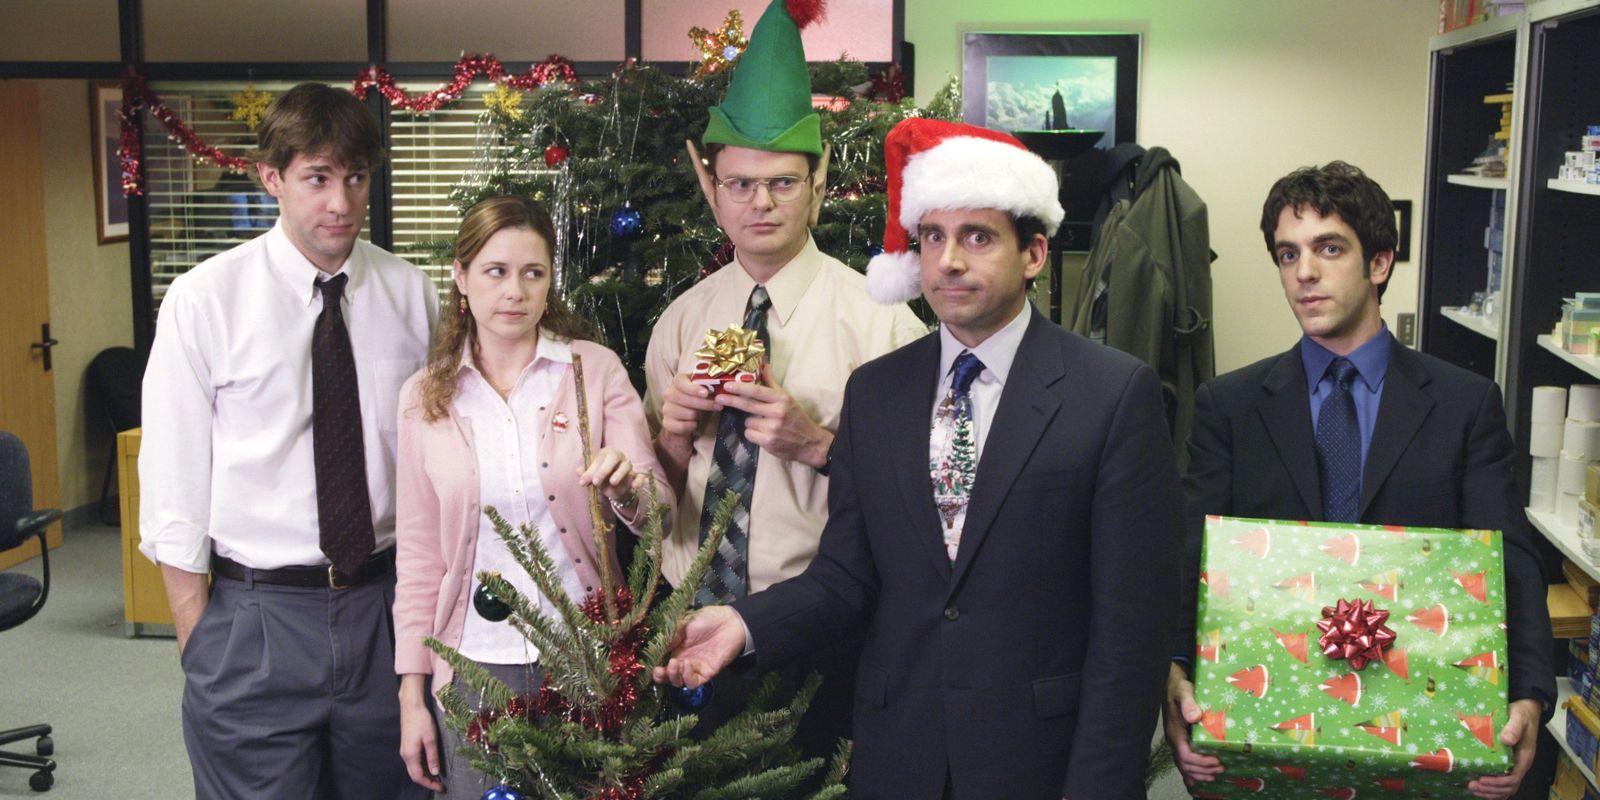 The Office Season 2 Christmas Party